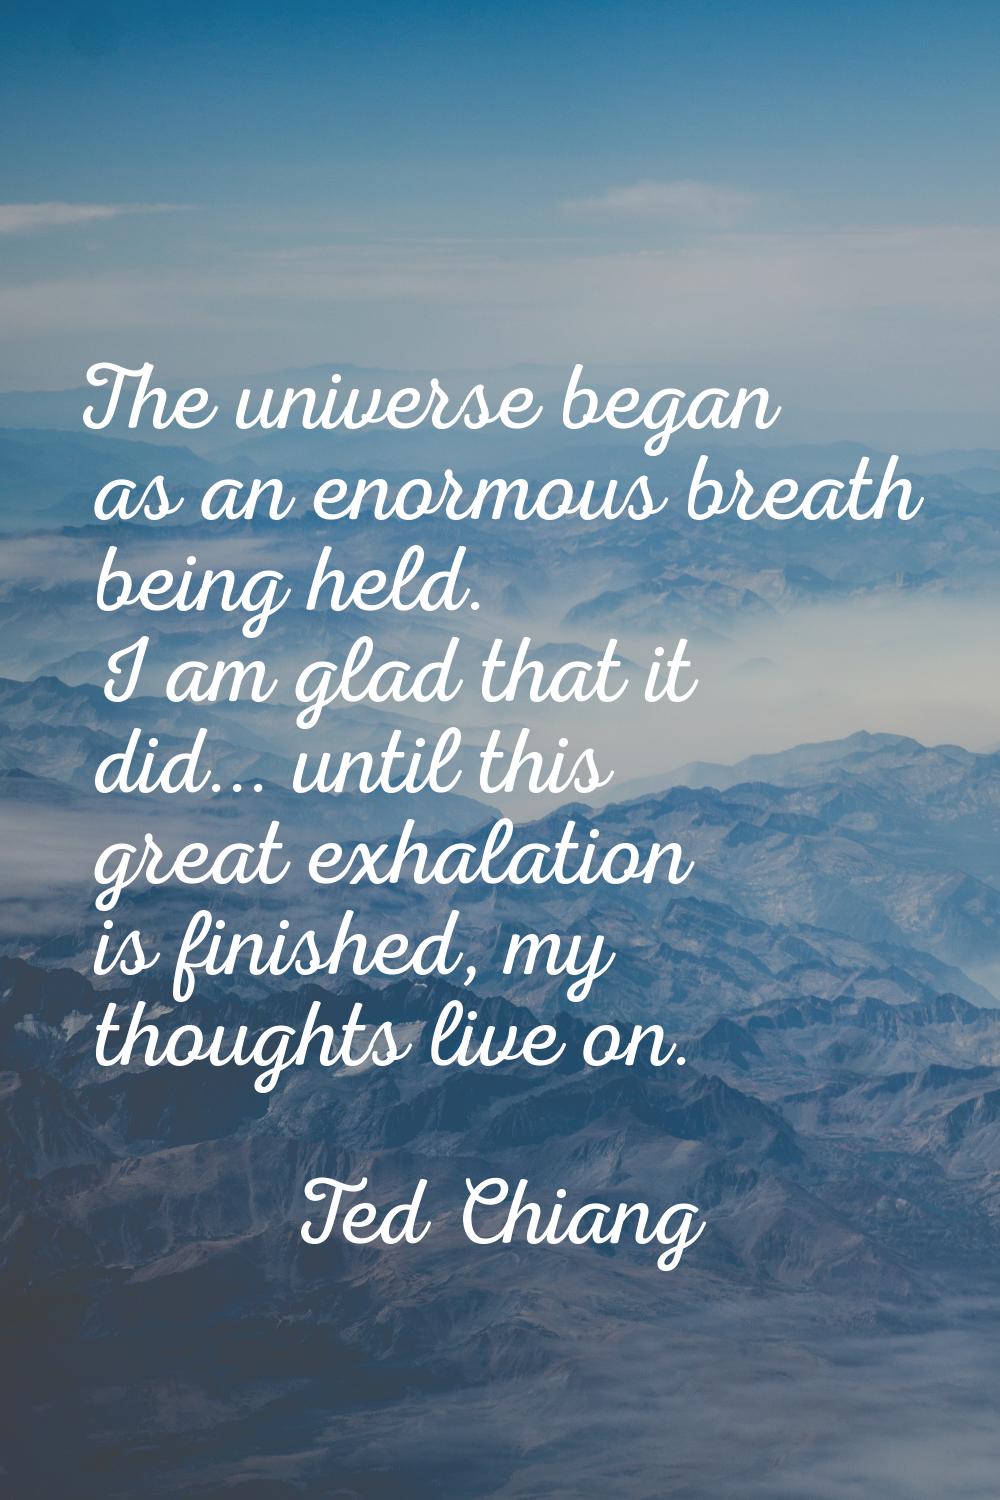 The universe began as an enormous breath being held. I am glad that it did... until this great exha